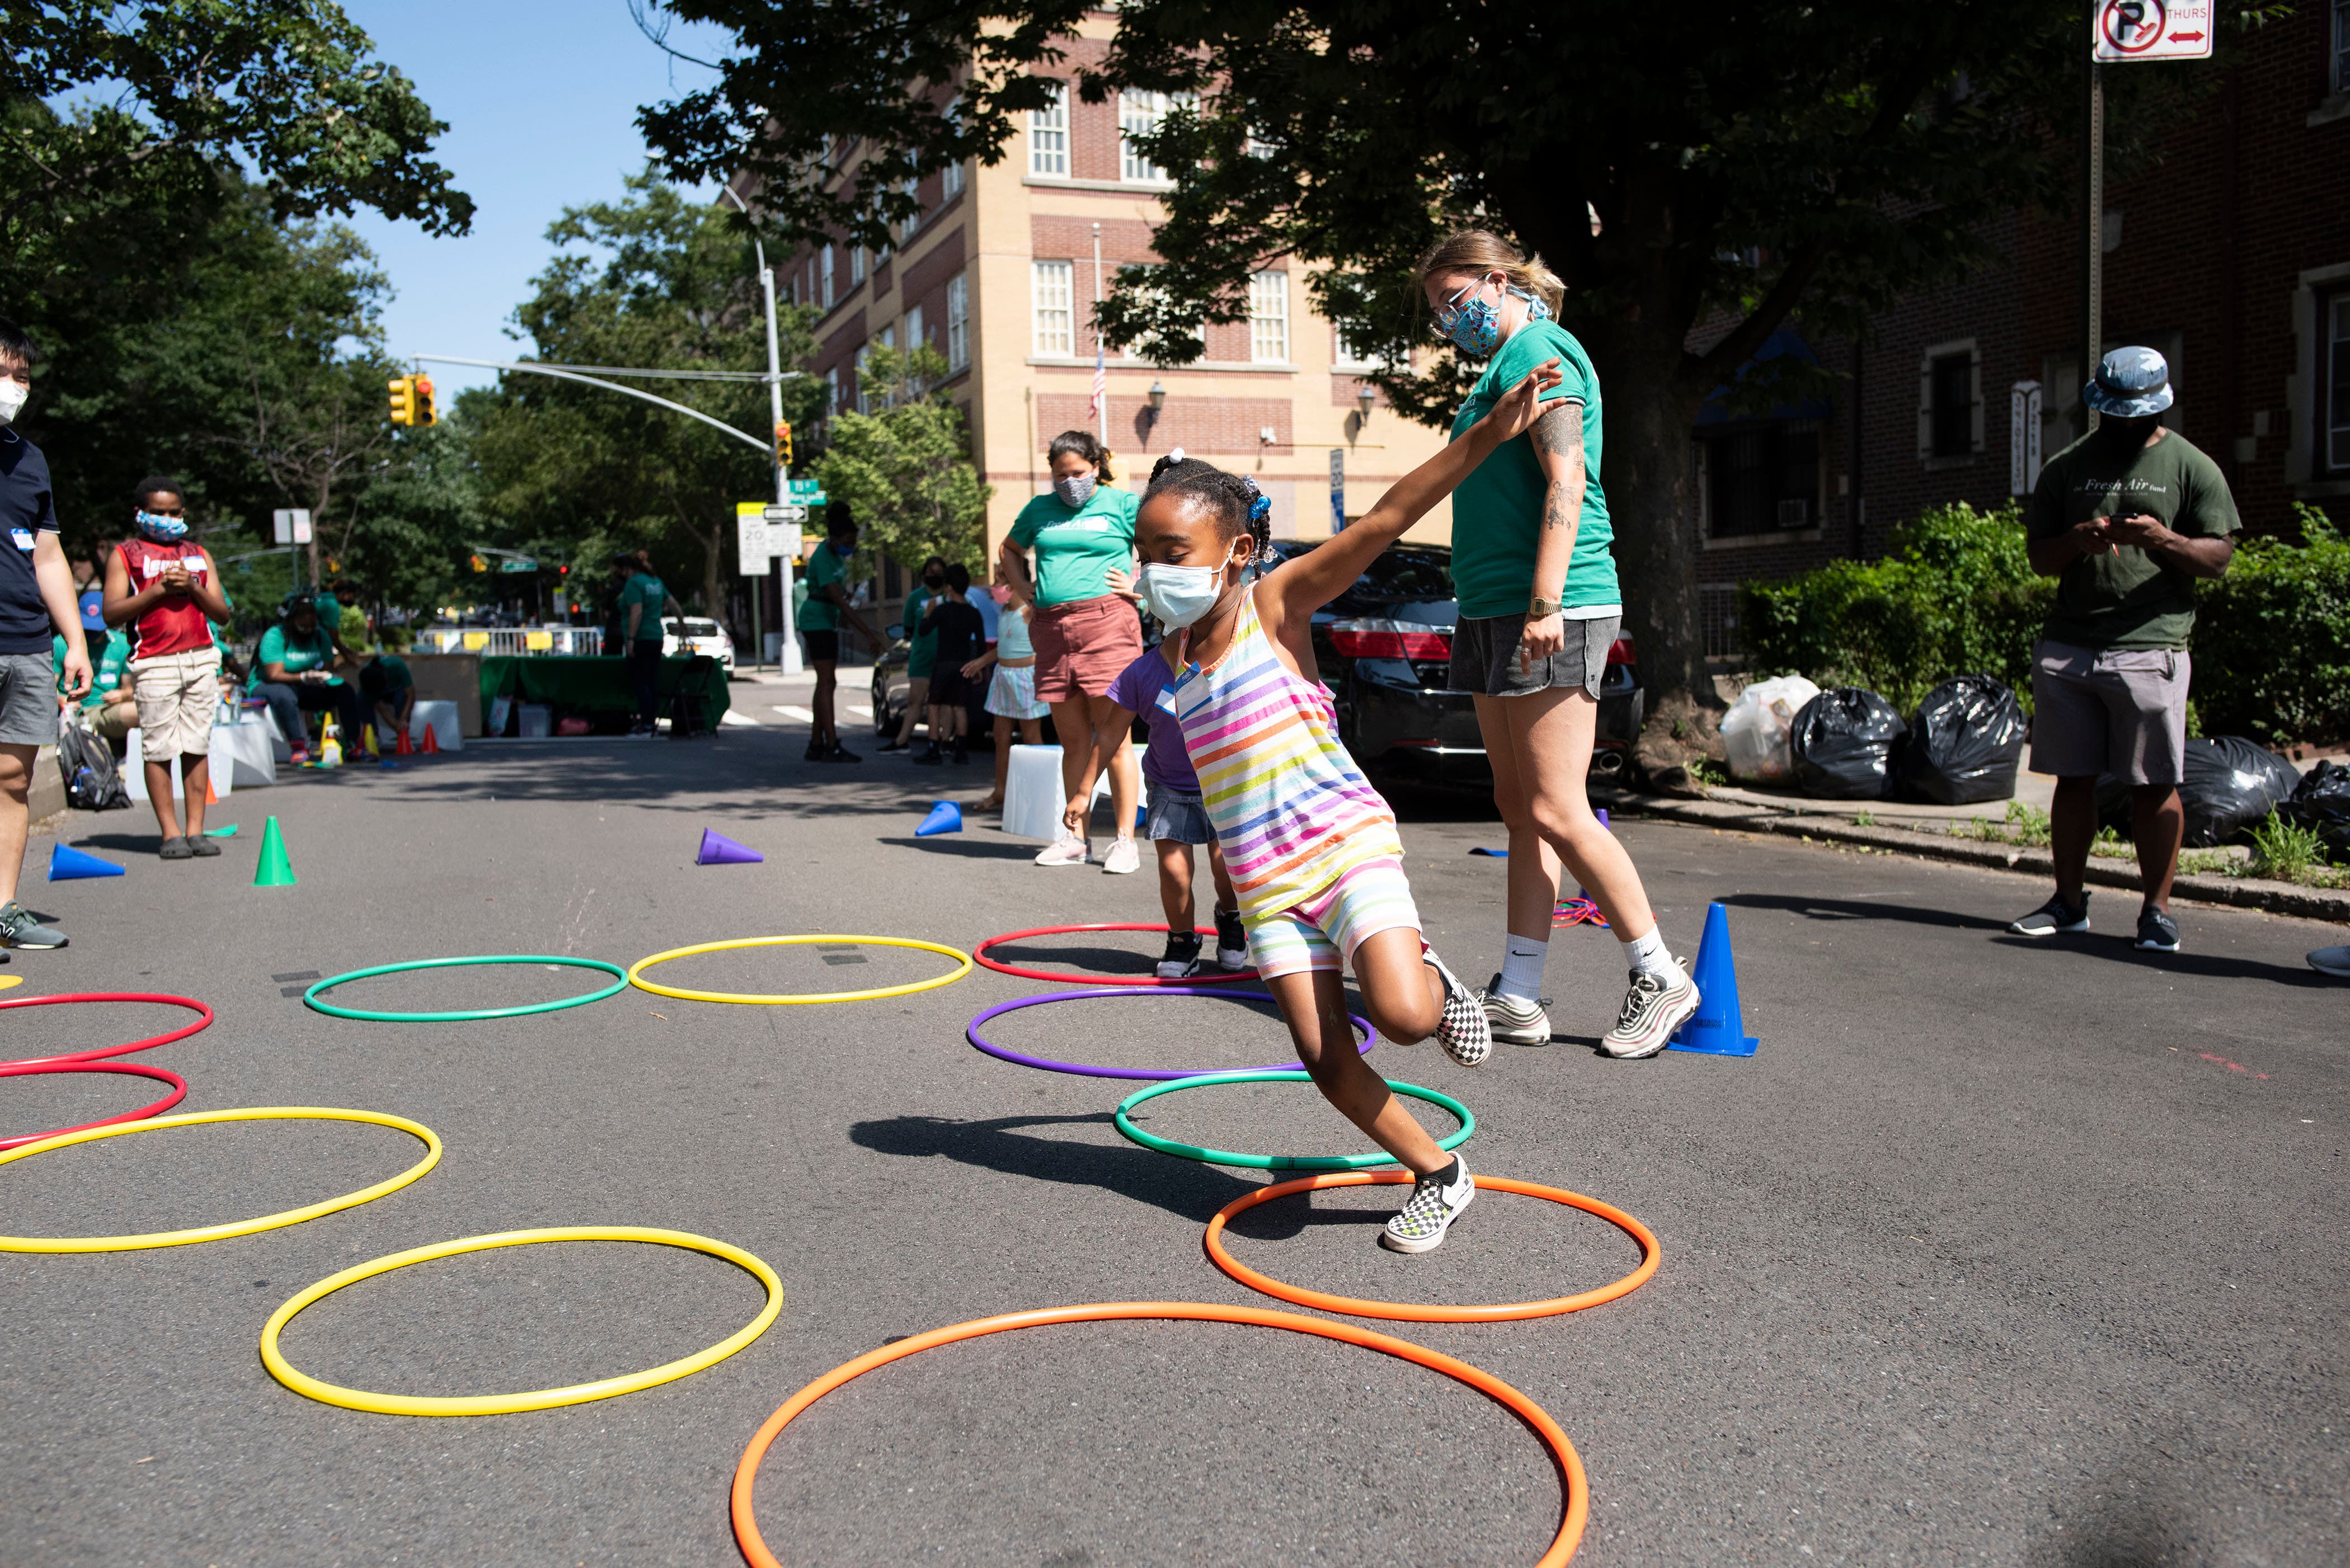 Kids safely playing at Fresh Air Fund site in Jackson Heights, New York.